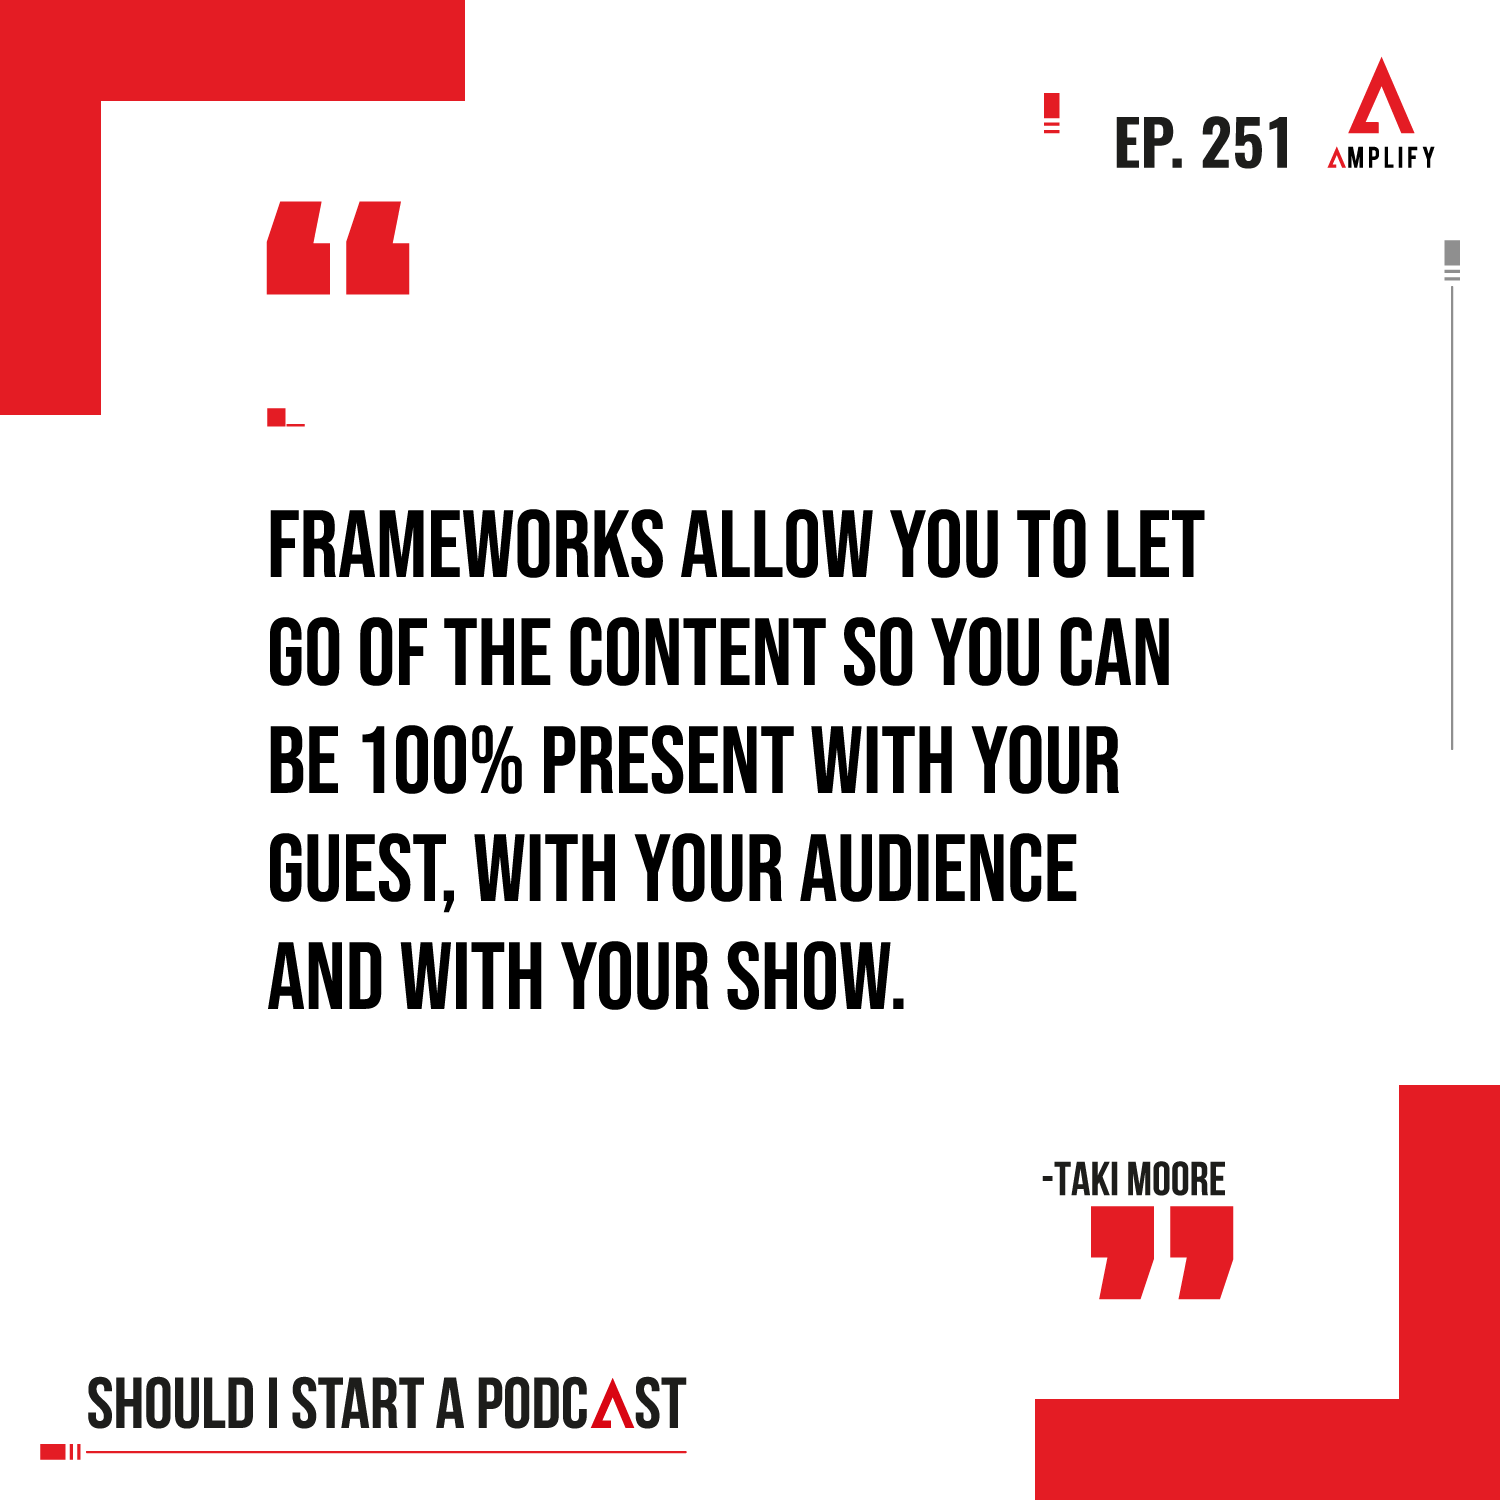 Quote:Frameworks allow you to let go of the content so you can be 100% present with your guest, with your audience and with your show.